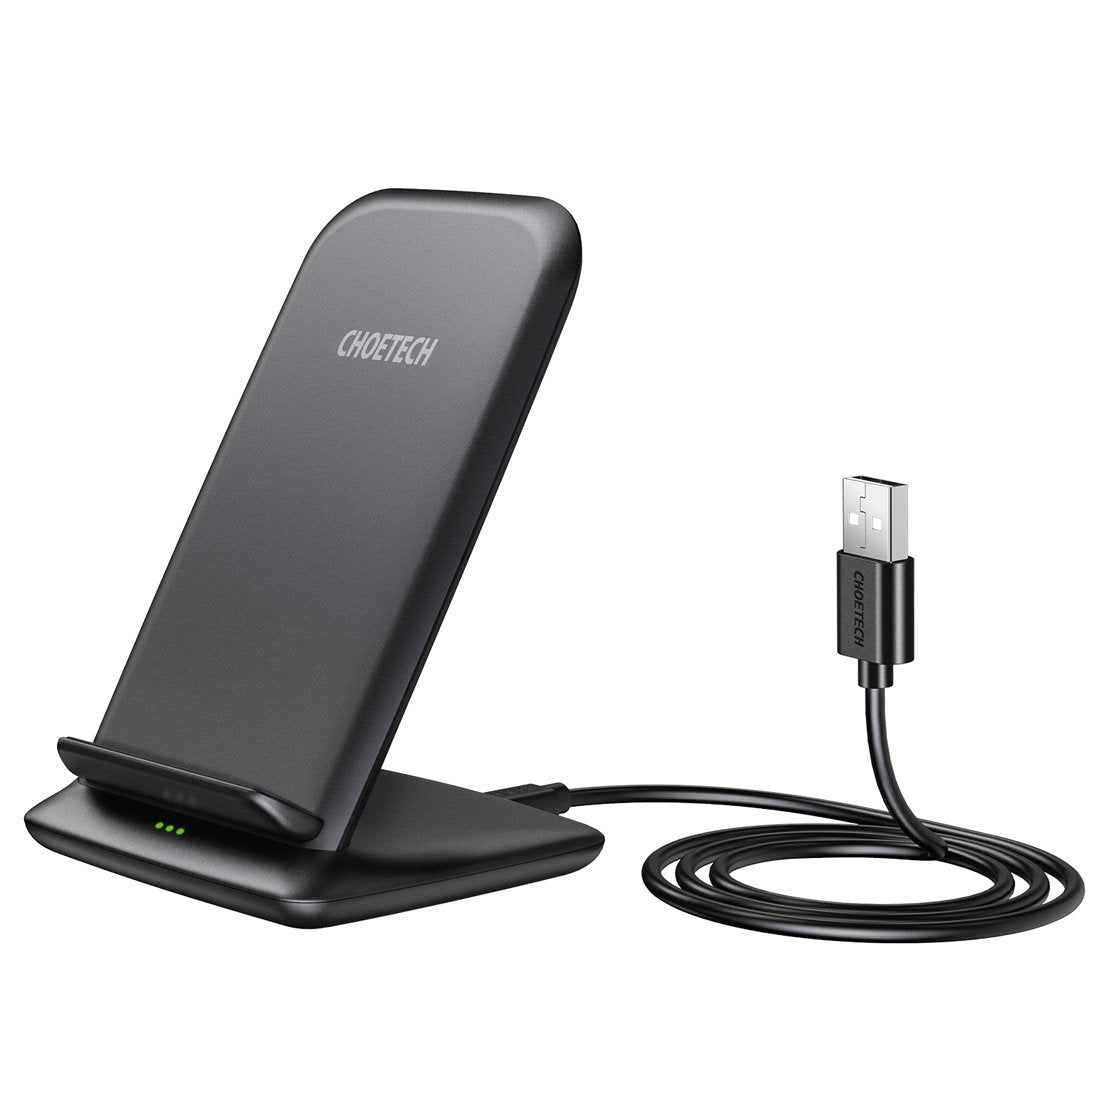 T555 Choetech 10W 7,5W Fast Wireless Charger Stand